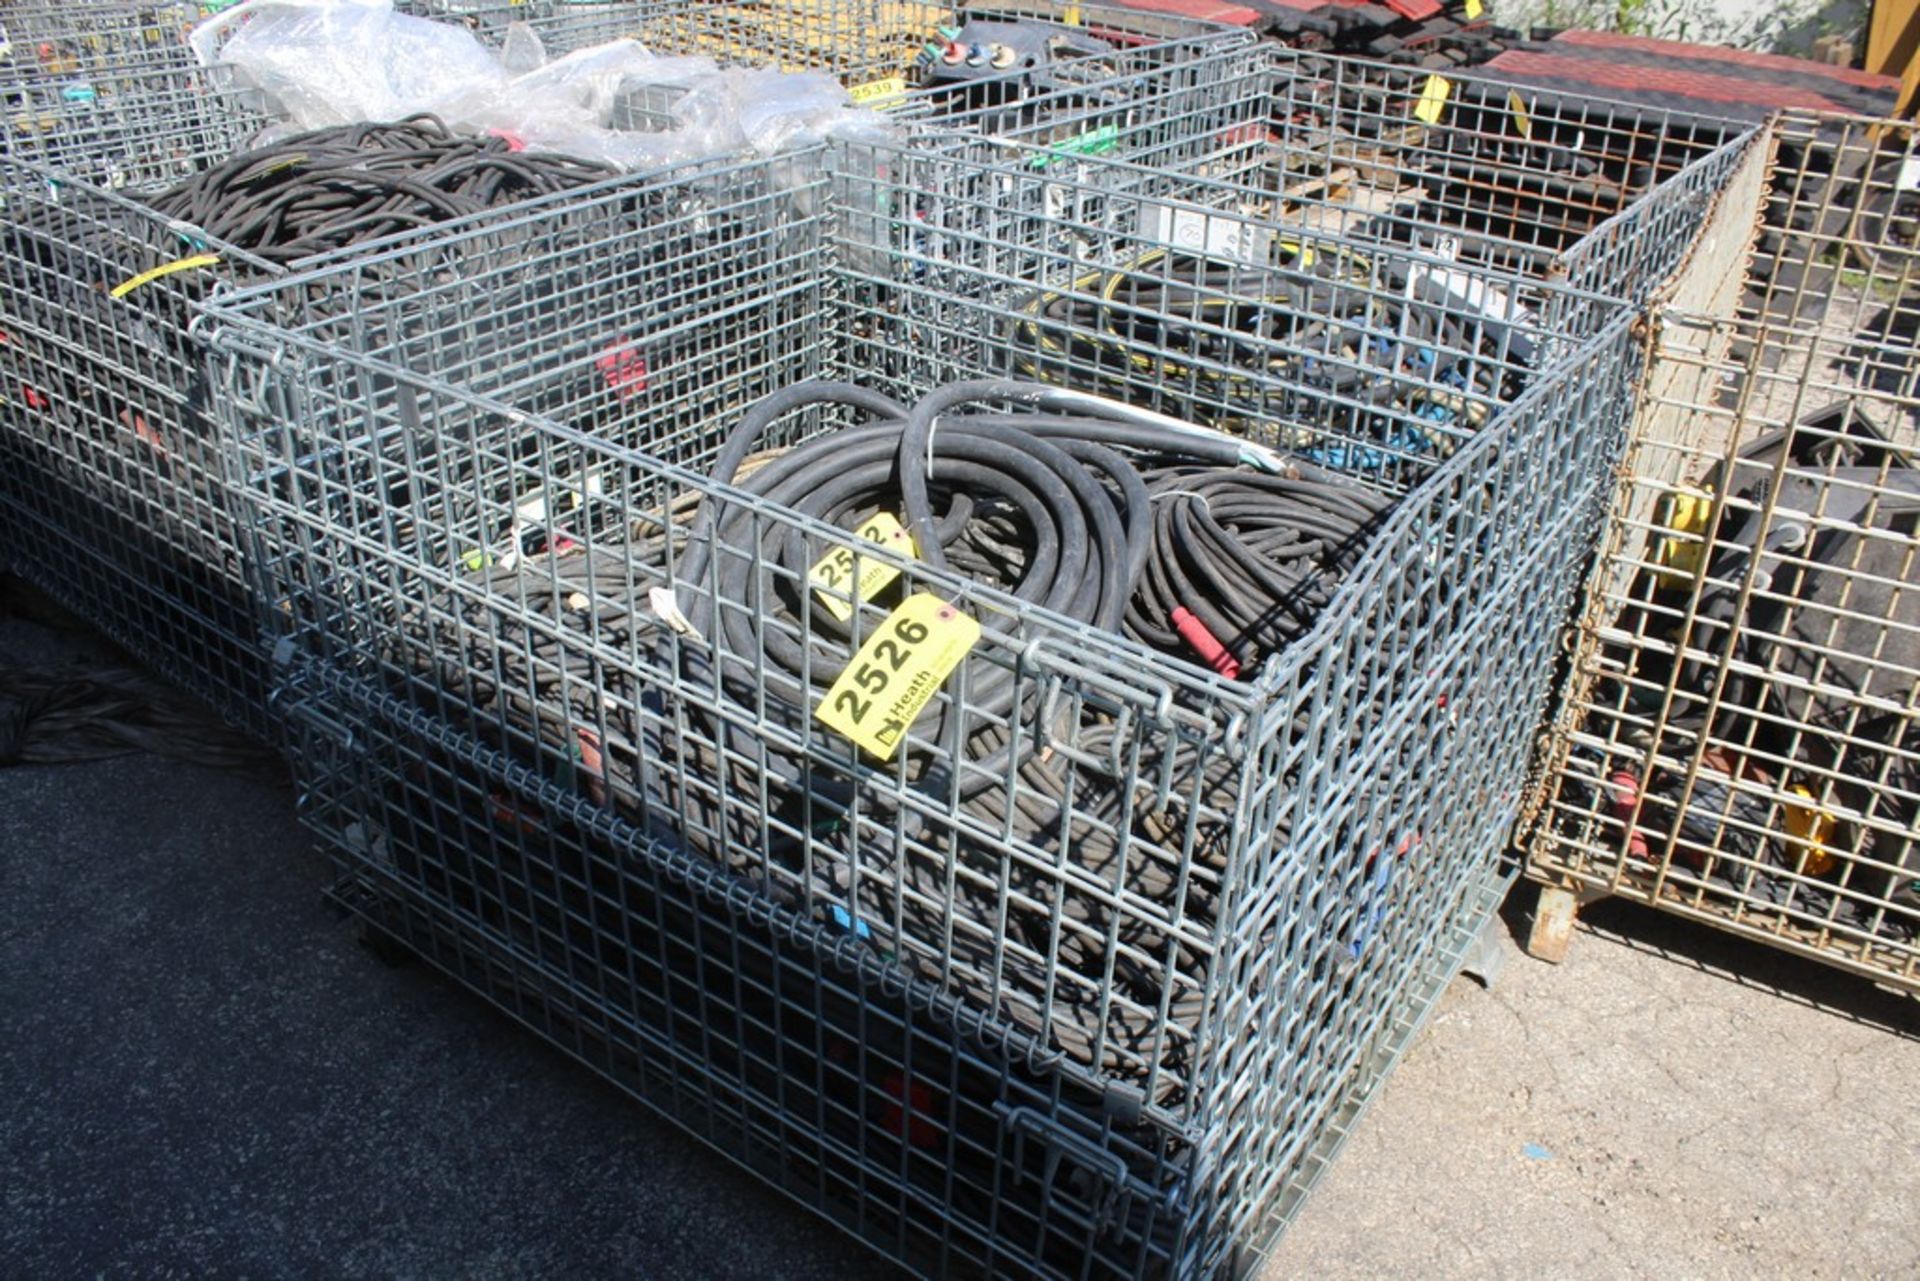 COLLAPSIBLE WIRE CRATE, 42" X 48" X 36"-NO CONTENTS (PICKUP DELAYED UNTIL CONTENTS REMOVED)